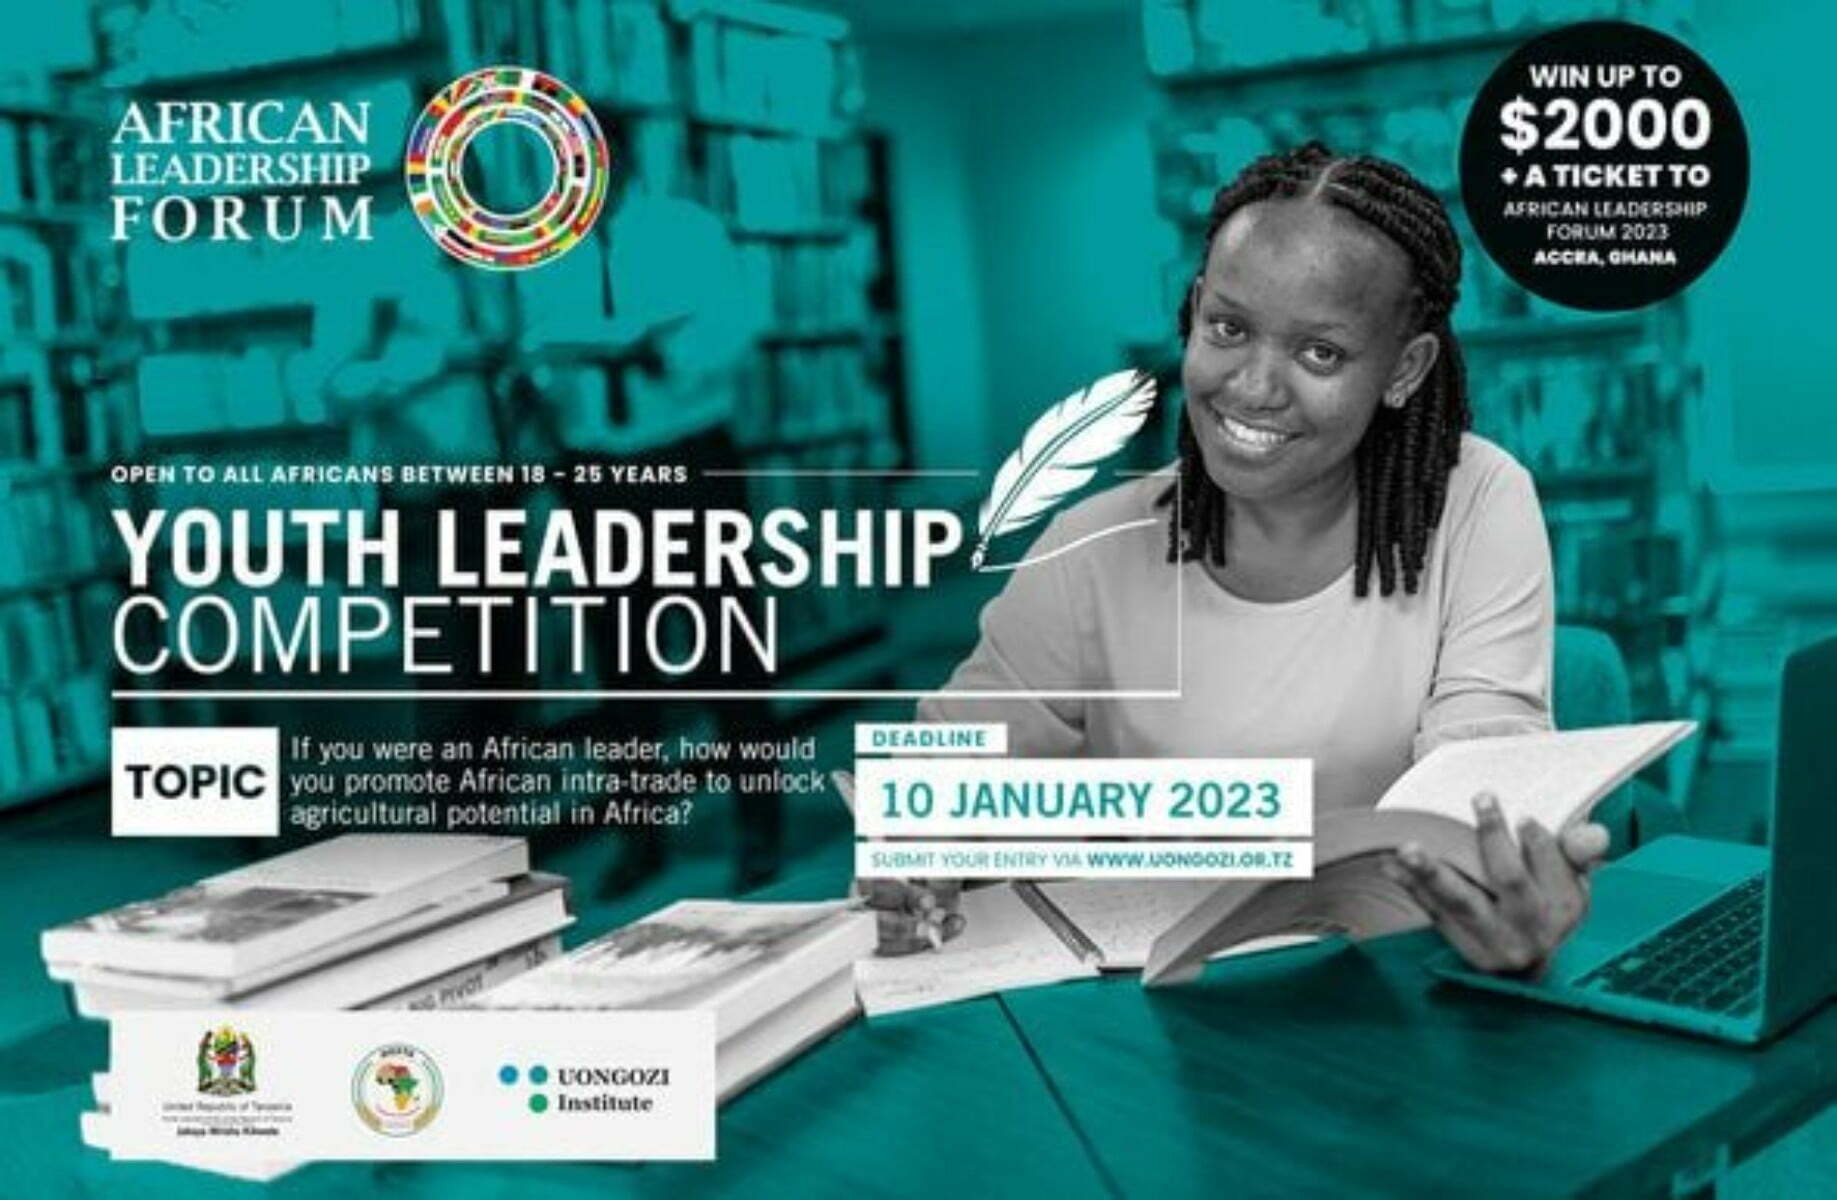 UONGOZI Institute 2023 Youth Leadership Competition for Africans